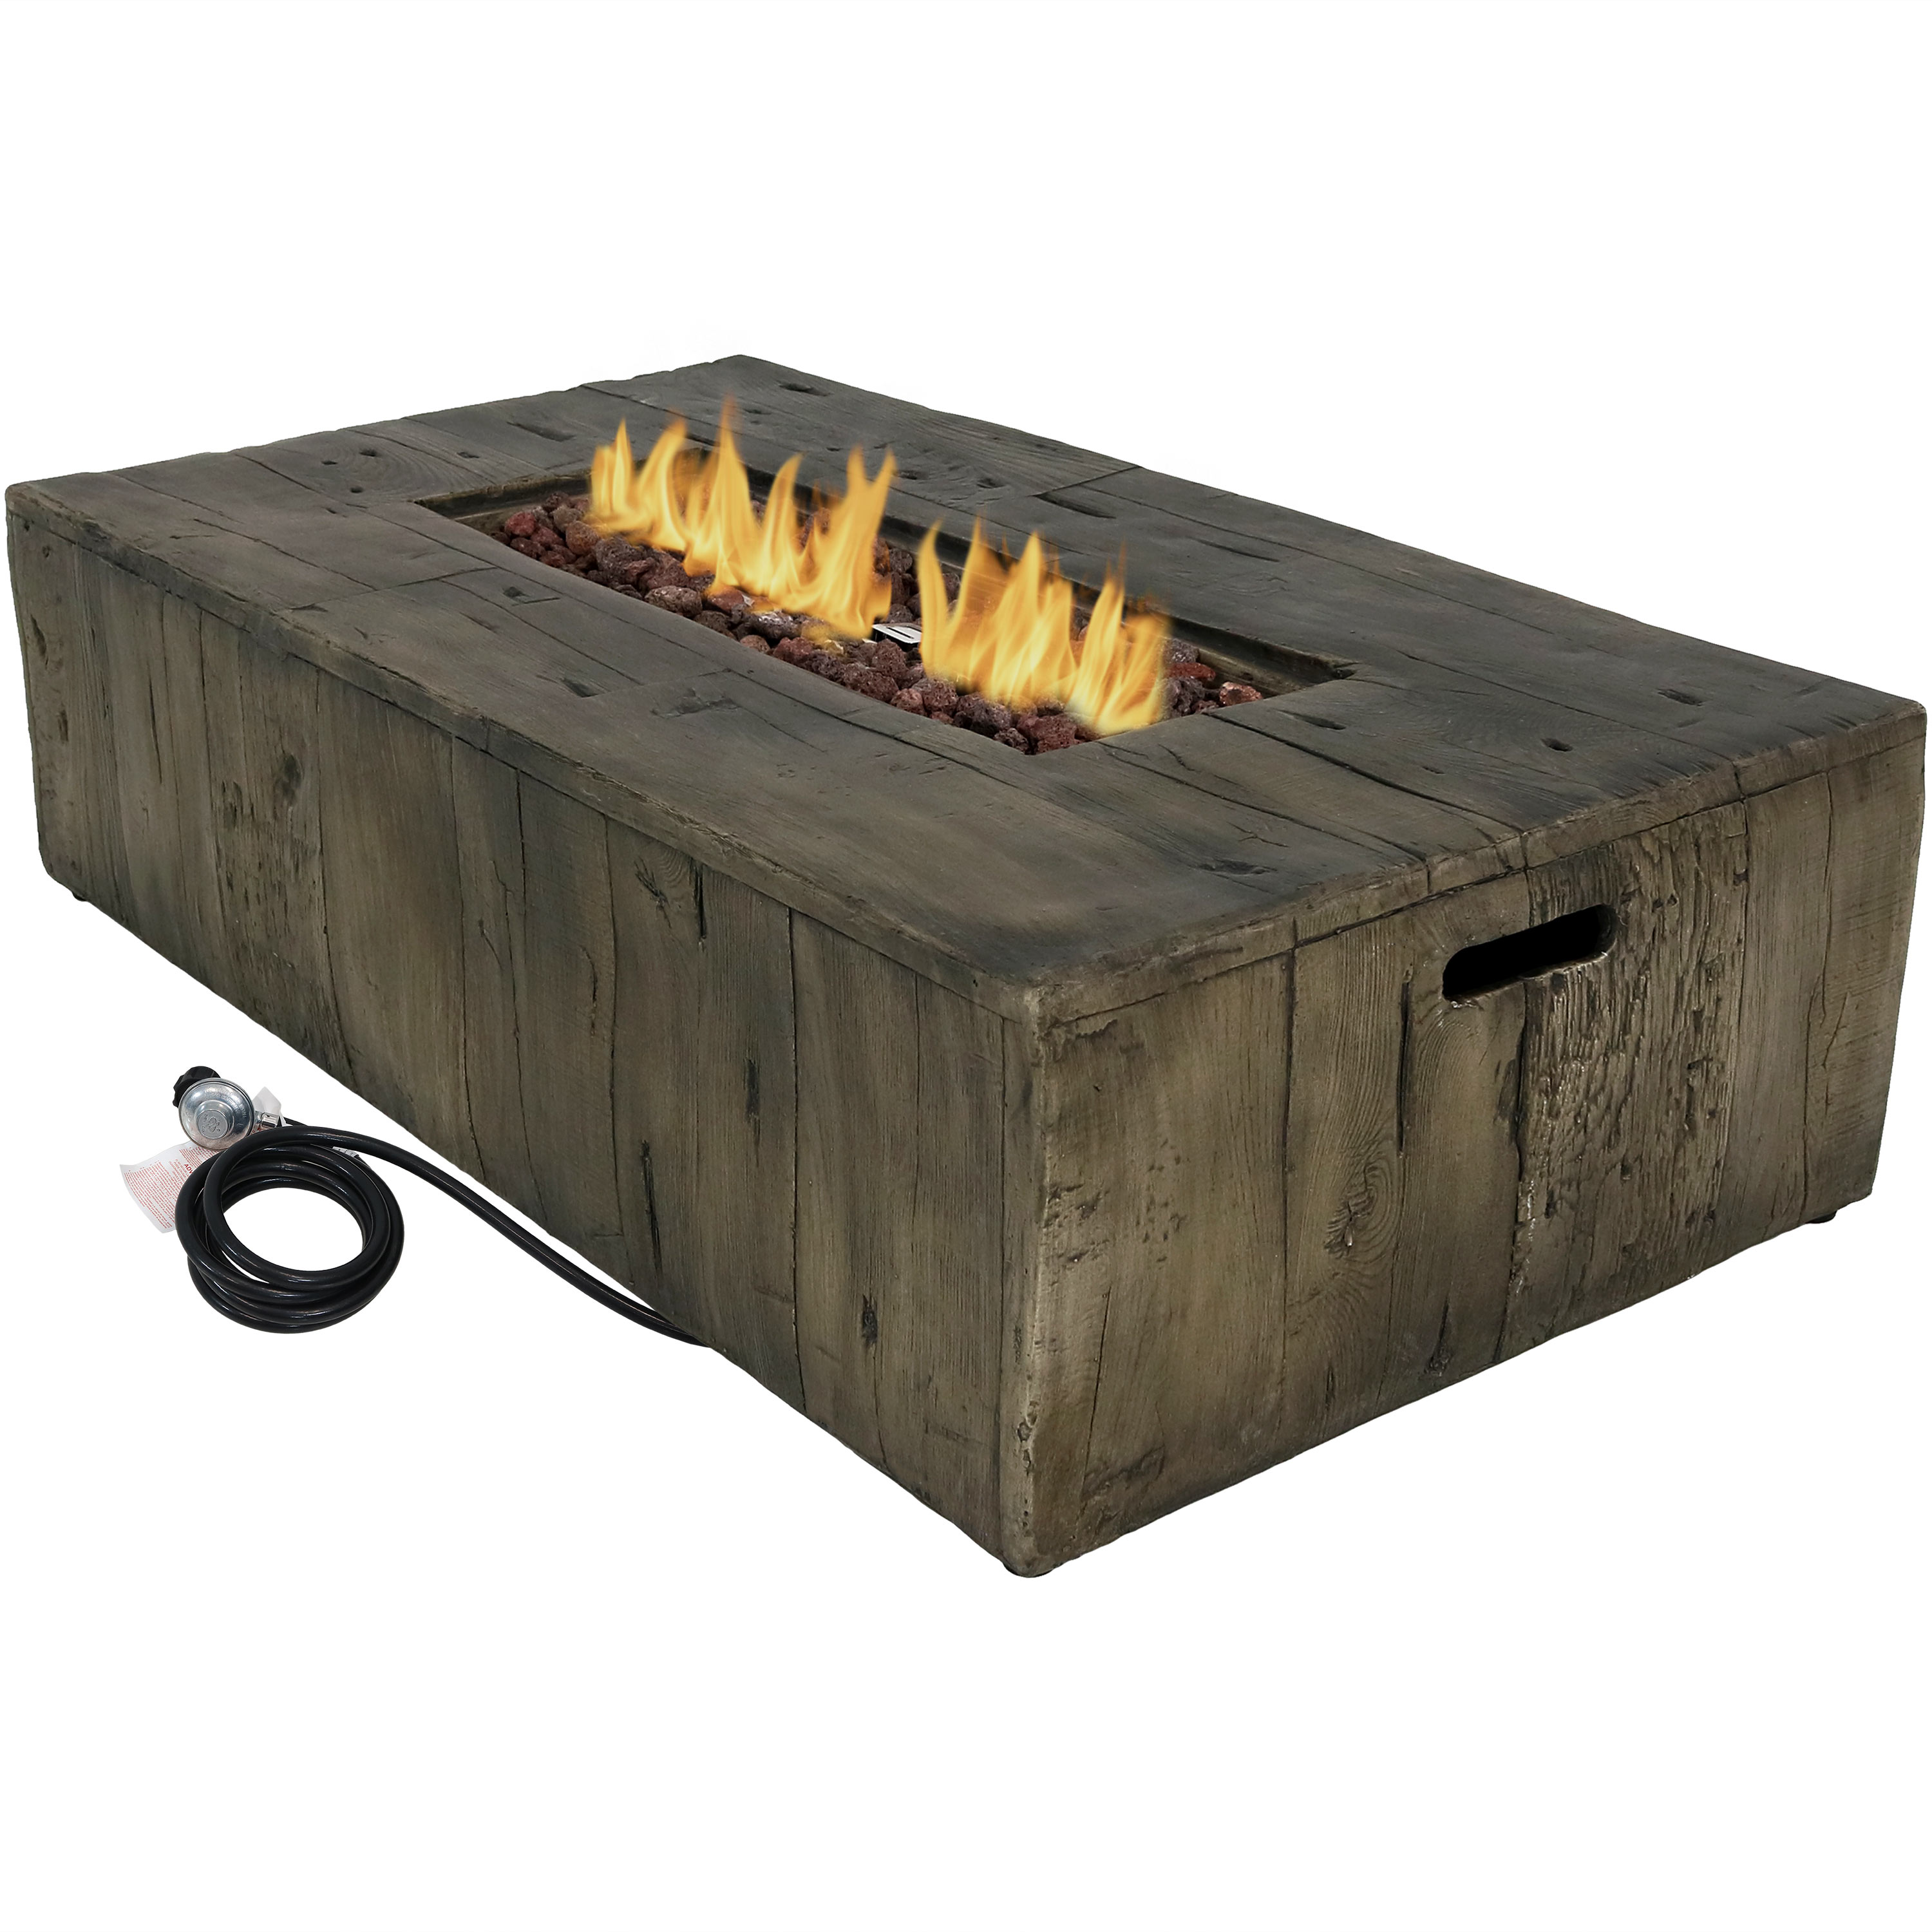 Sunnydaze Decor 26 5 In W 50000 Btu Brown Concrete Propane Gas Fire Pit Table In The Gas Fire Pits Department At Lowes Com